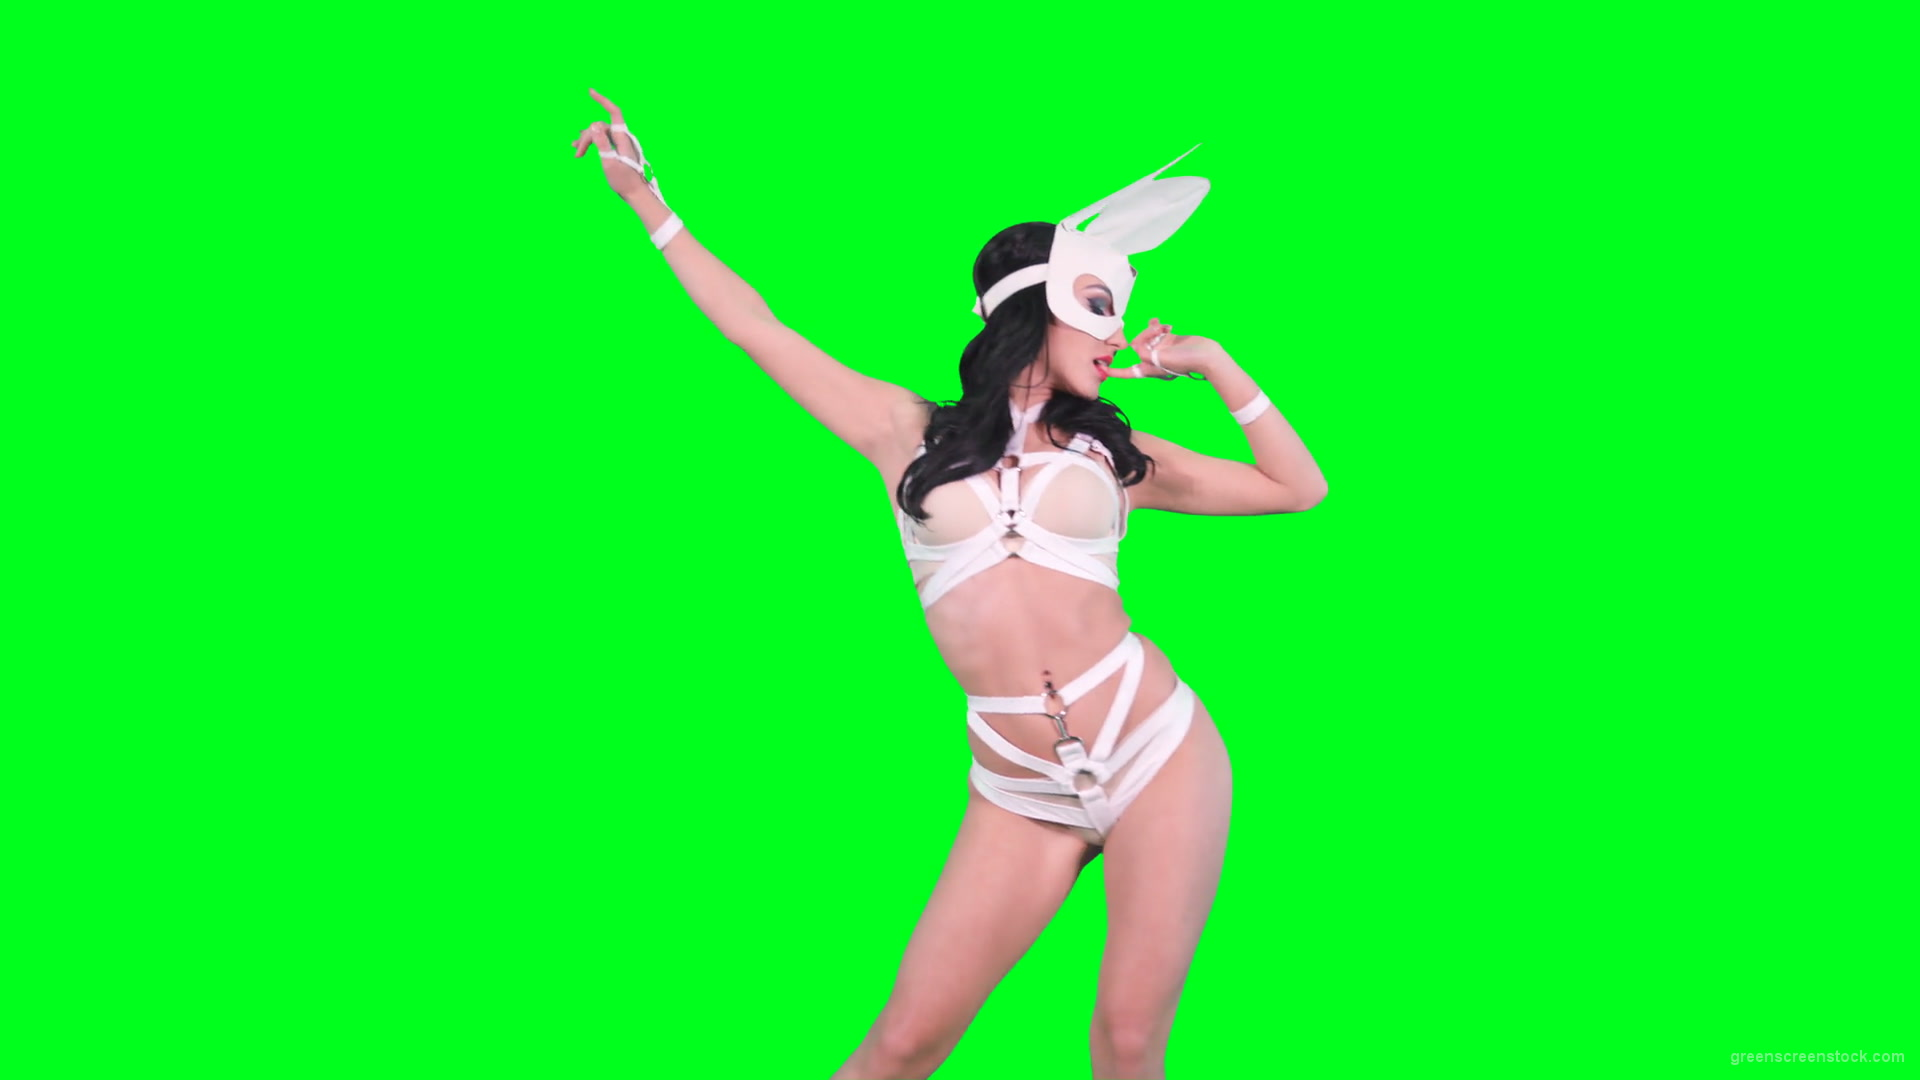 Sexy-bunny-girl-in-rabbit-costume-on-green-screen-4K-Video-Footage-1920_004 Green Screen Stock